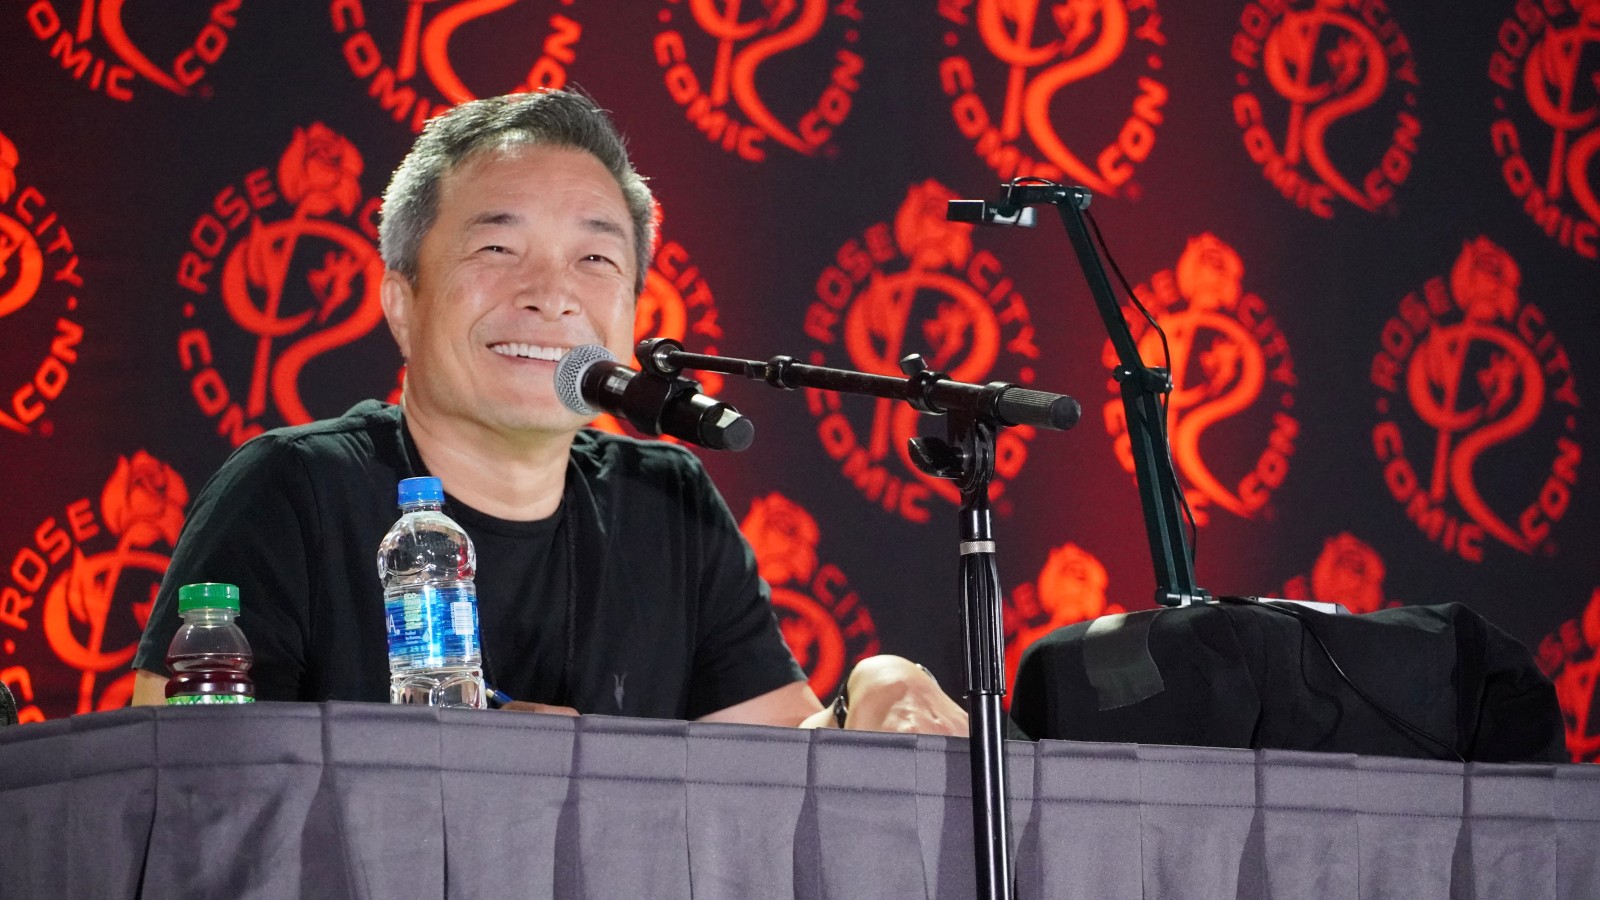 Jim Lee hosts a panel at a comic con event.